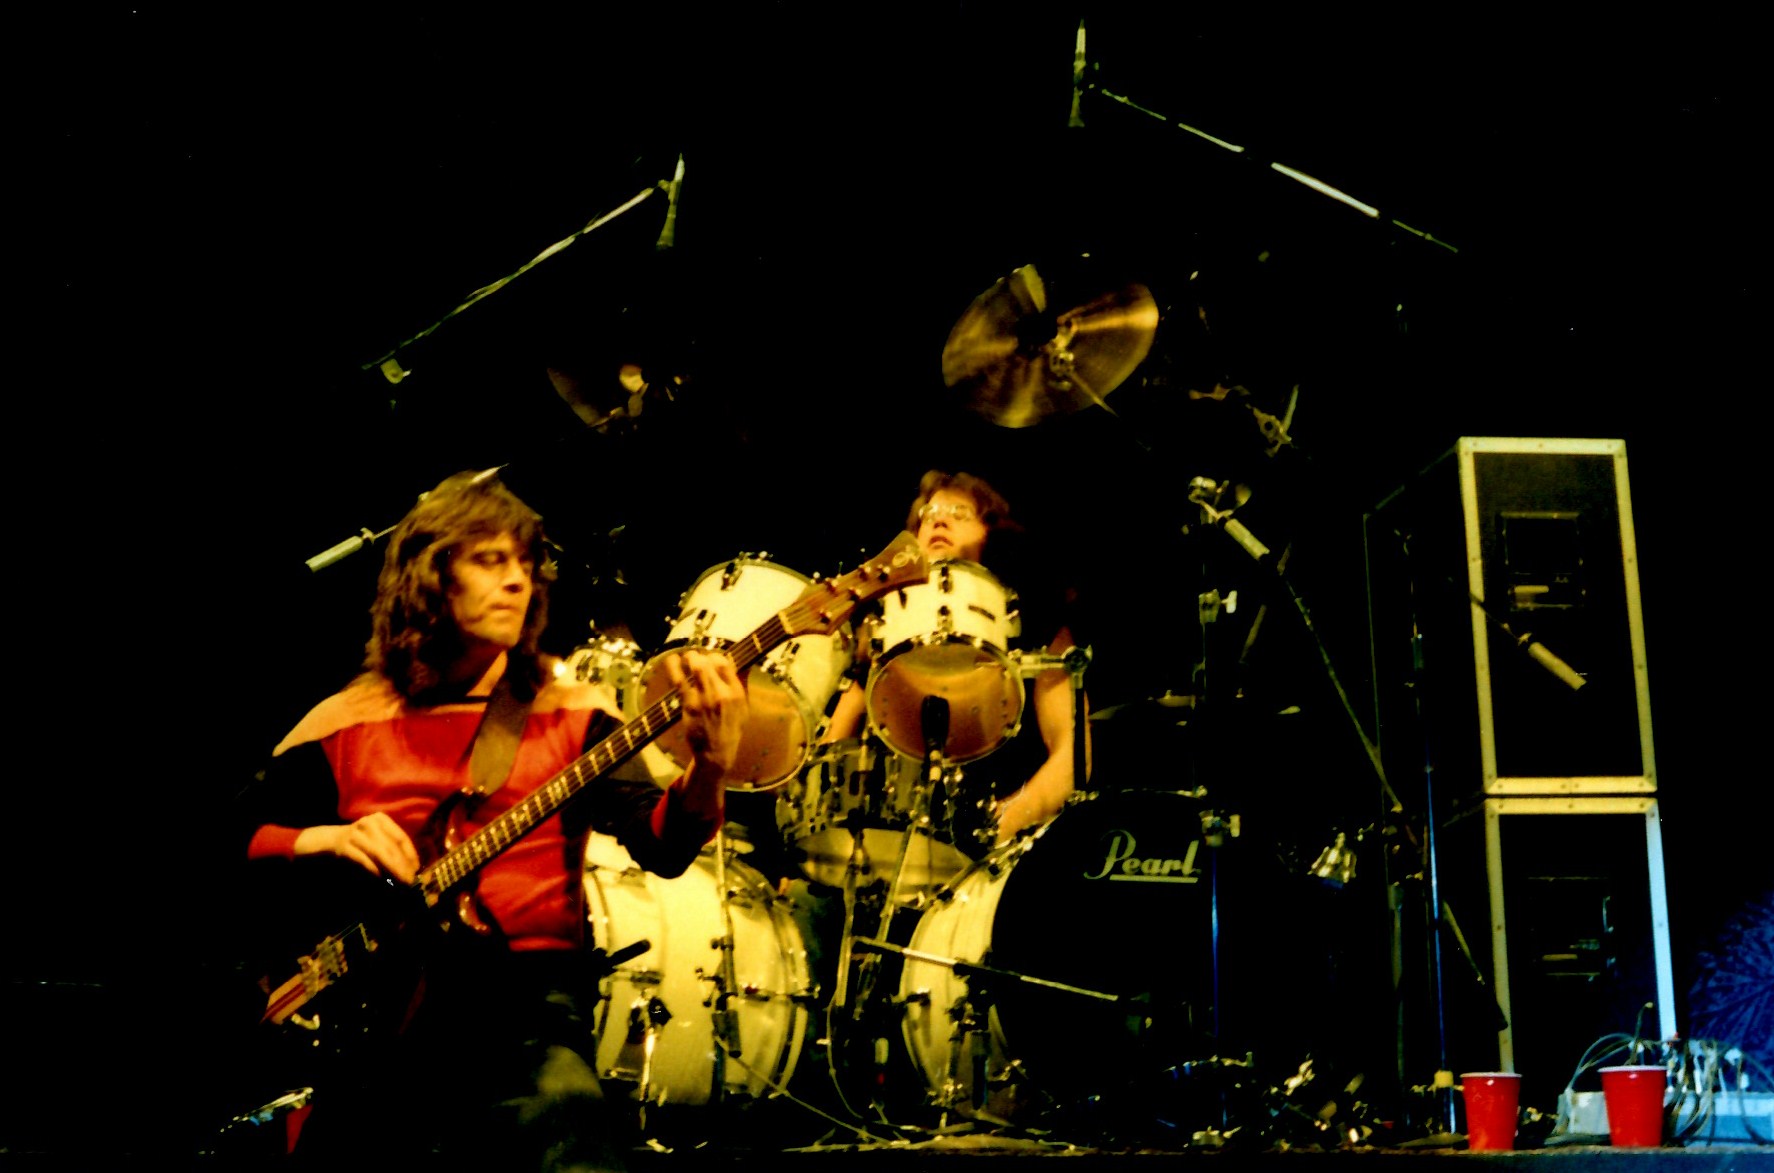 Rush 'Moving Pictures' Tour Pictures - Evansville, IN 03/10/1981